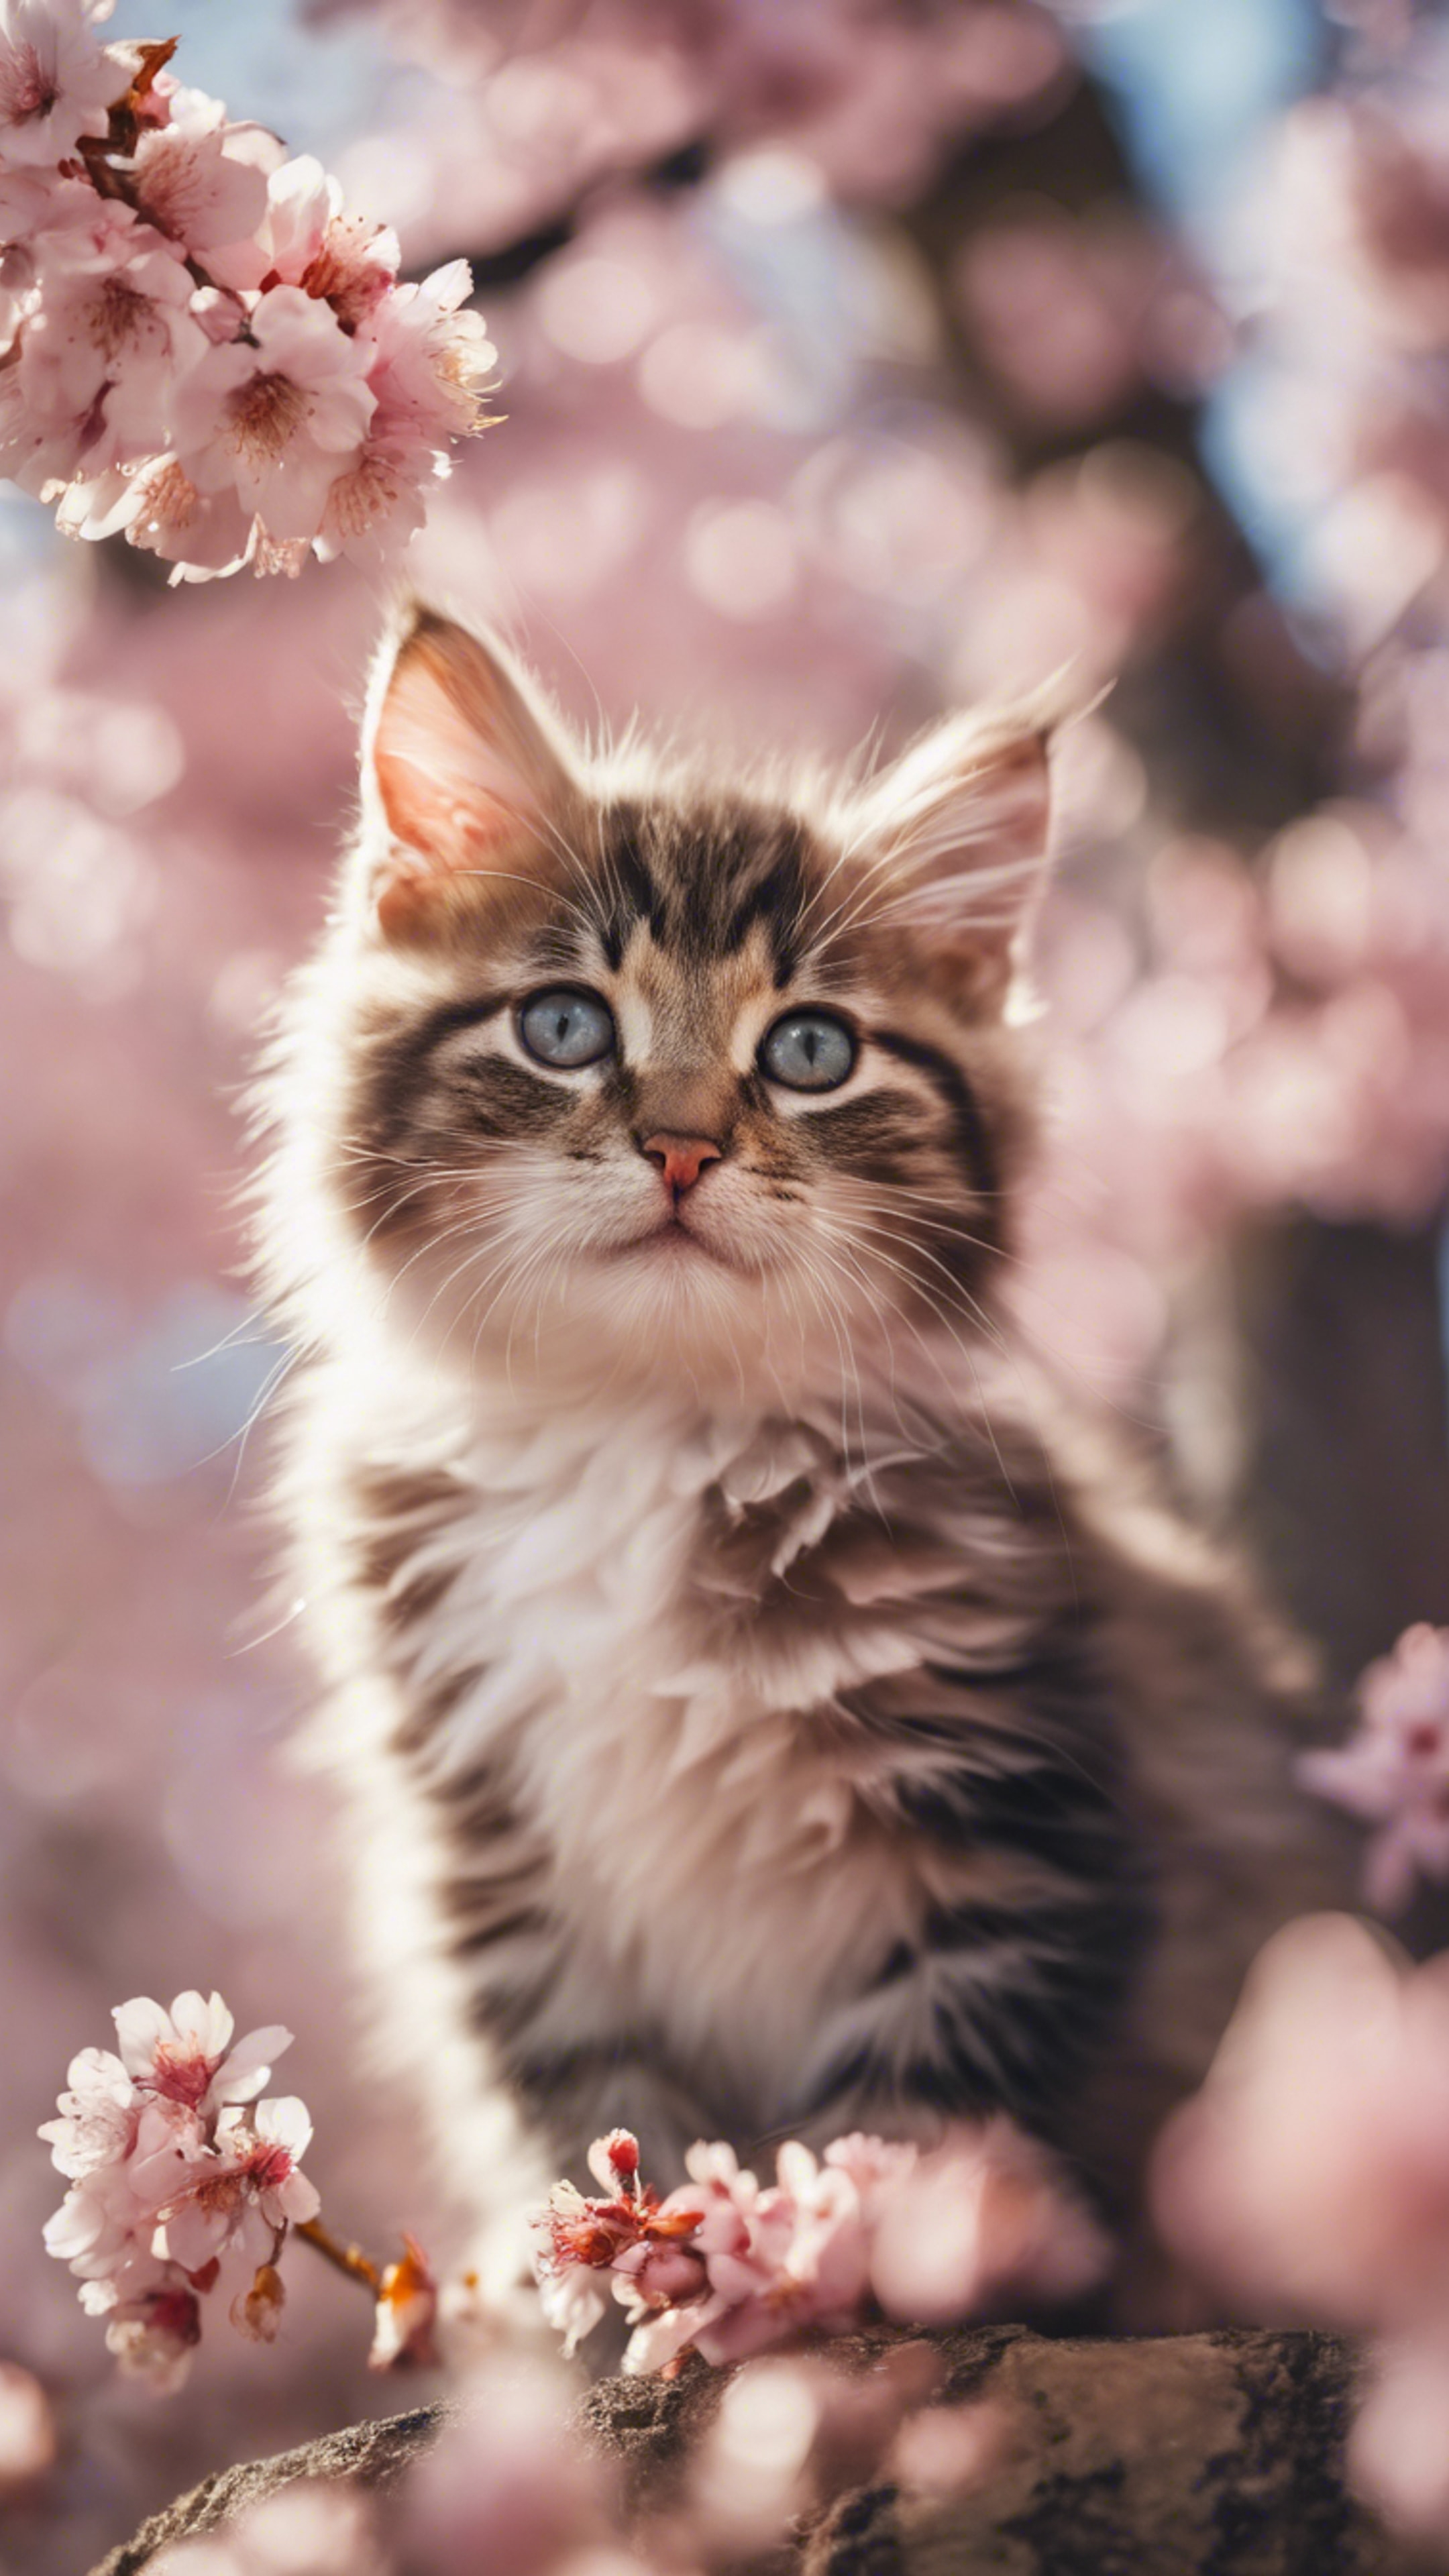 A cherry blossom tree in full bloom as the backdrop to a playful kitten in spring. Fondo de pantalla[56e1c1b9132e46d98bd1]